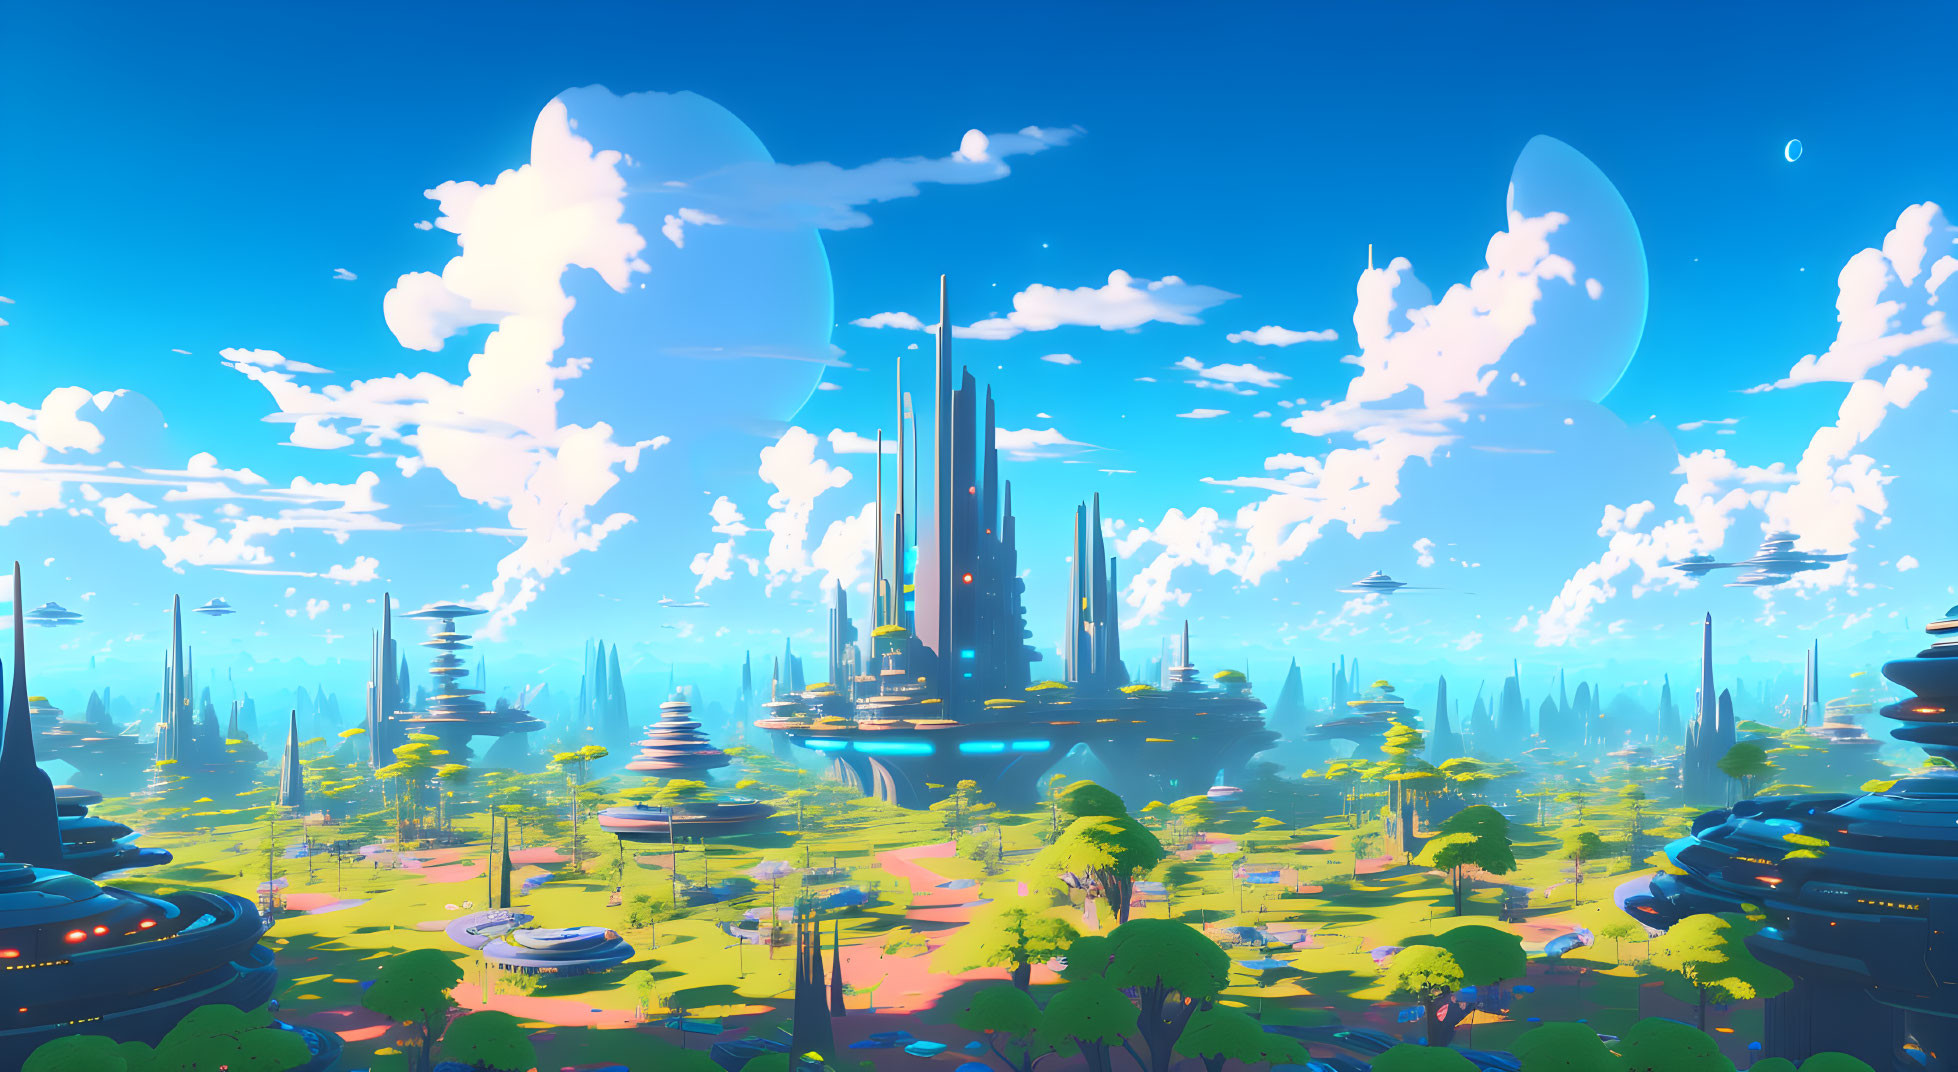 Futuristic cityscape with towering spires in lush landscape